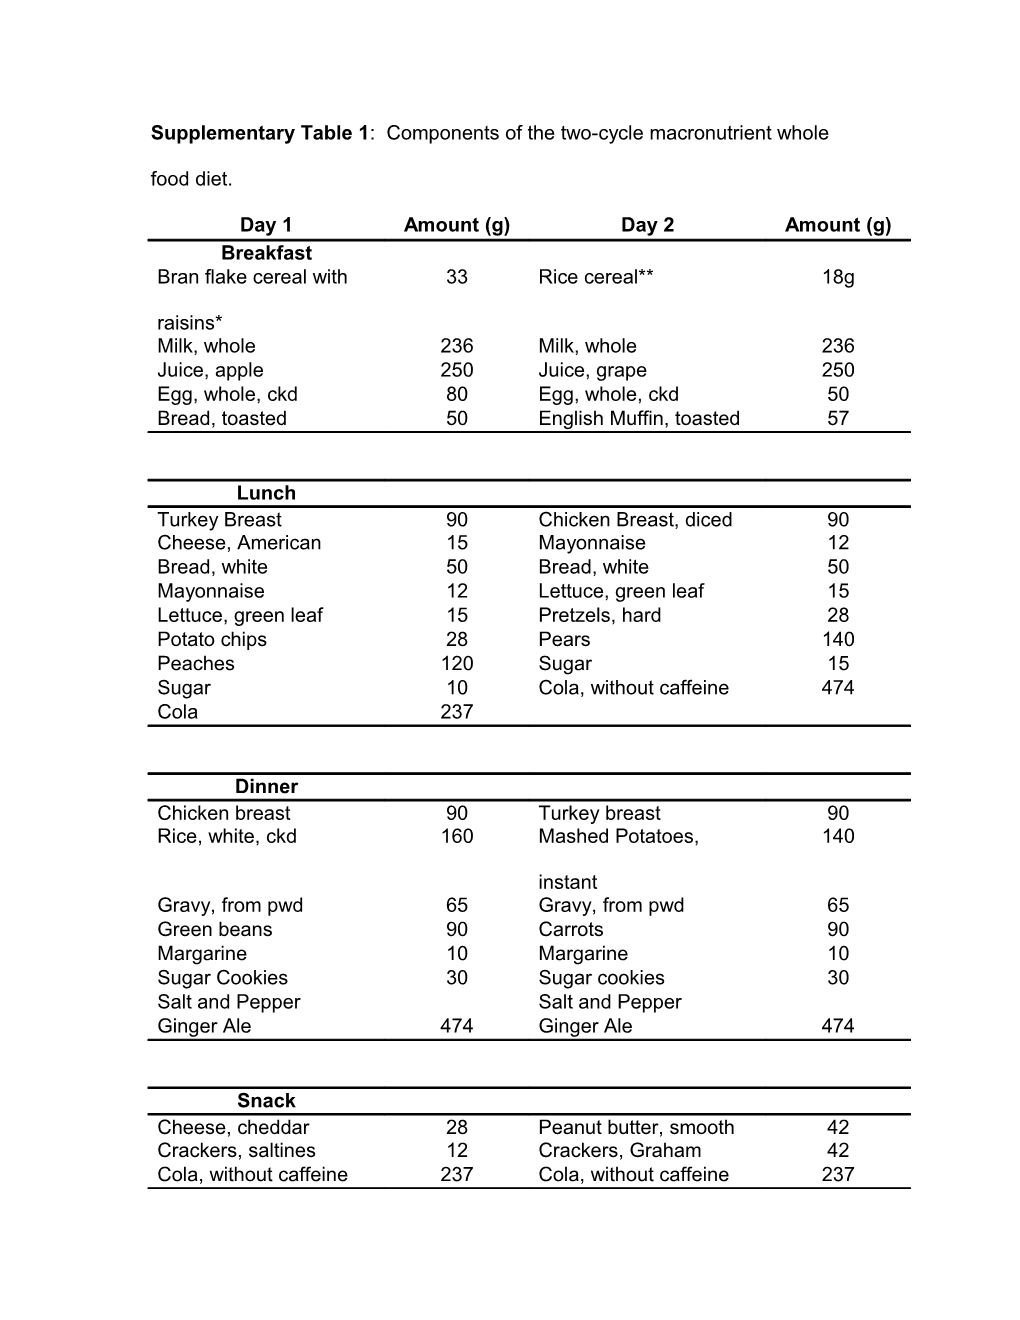 Supplementary Table 1: Components of the Two-Cycle Macronutrient Whole Food Diet